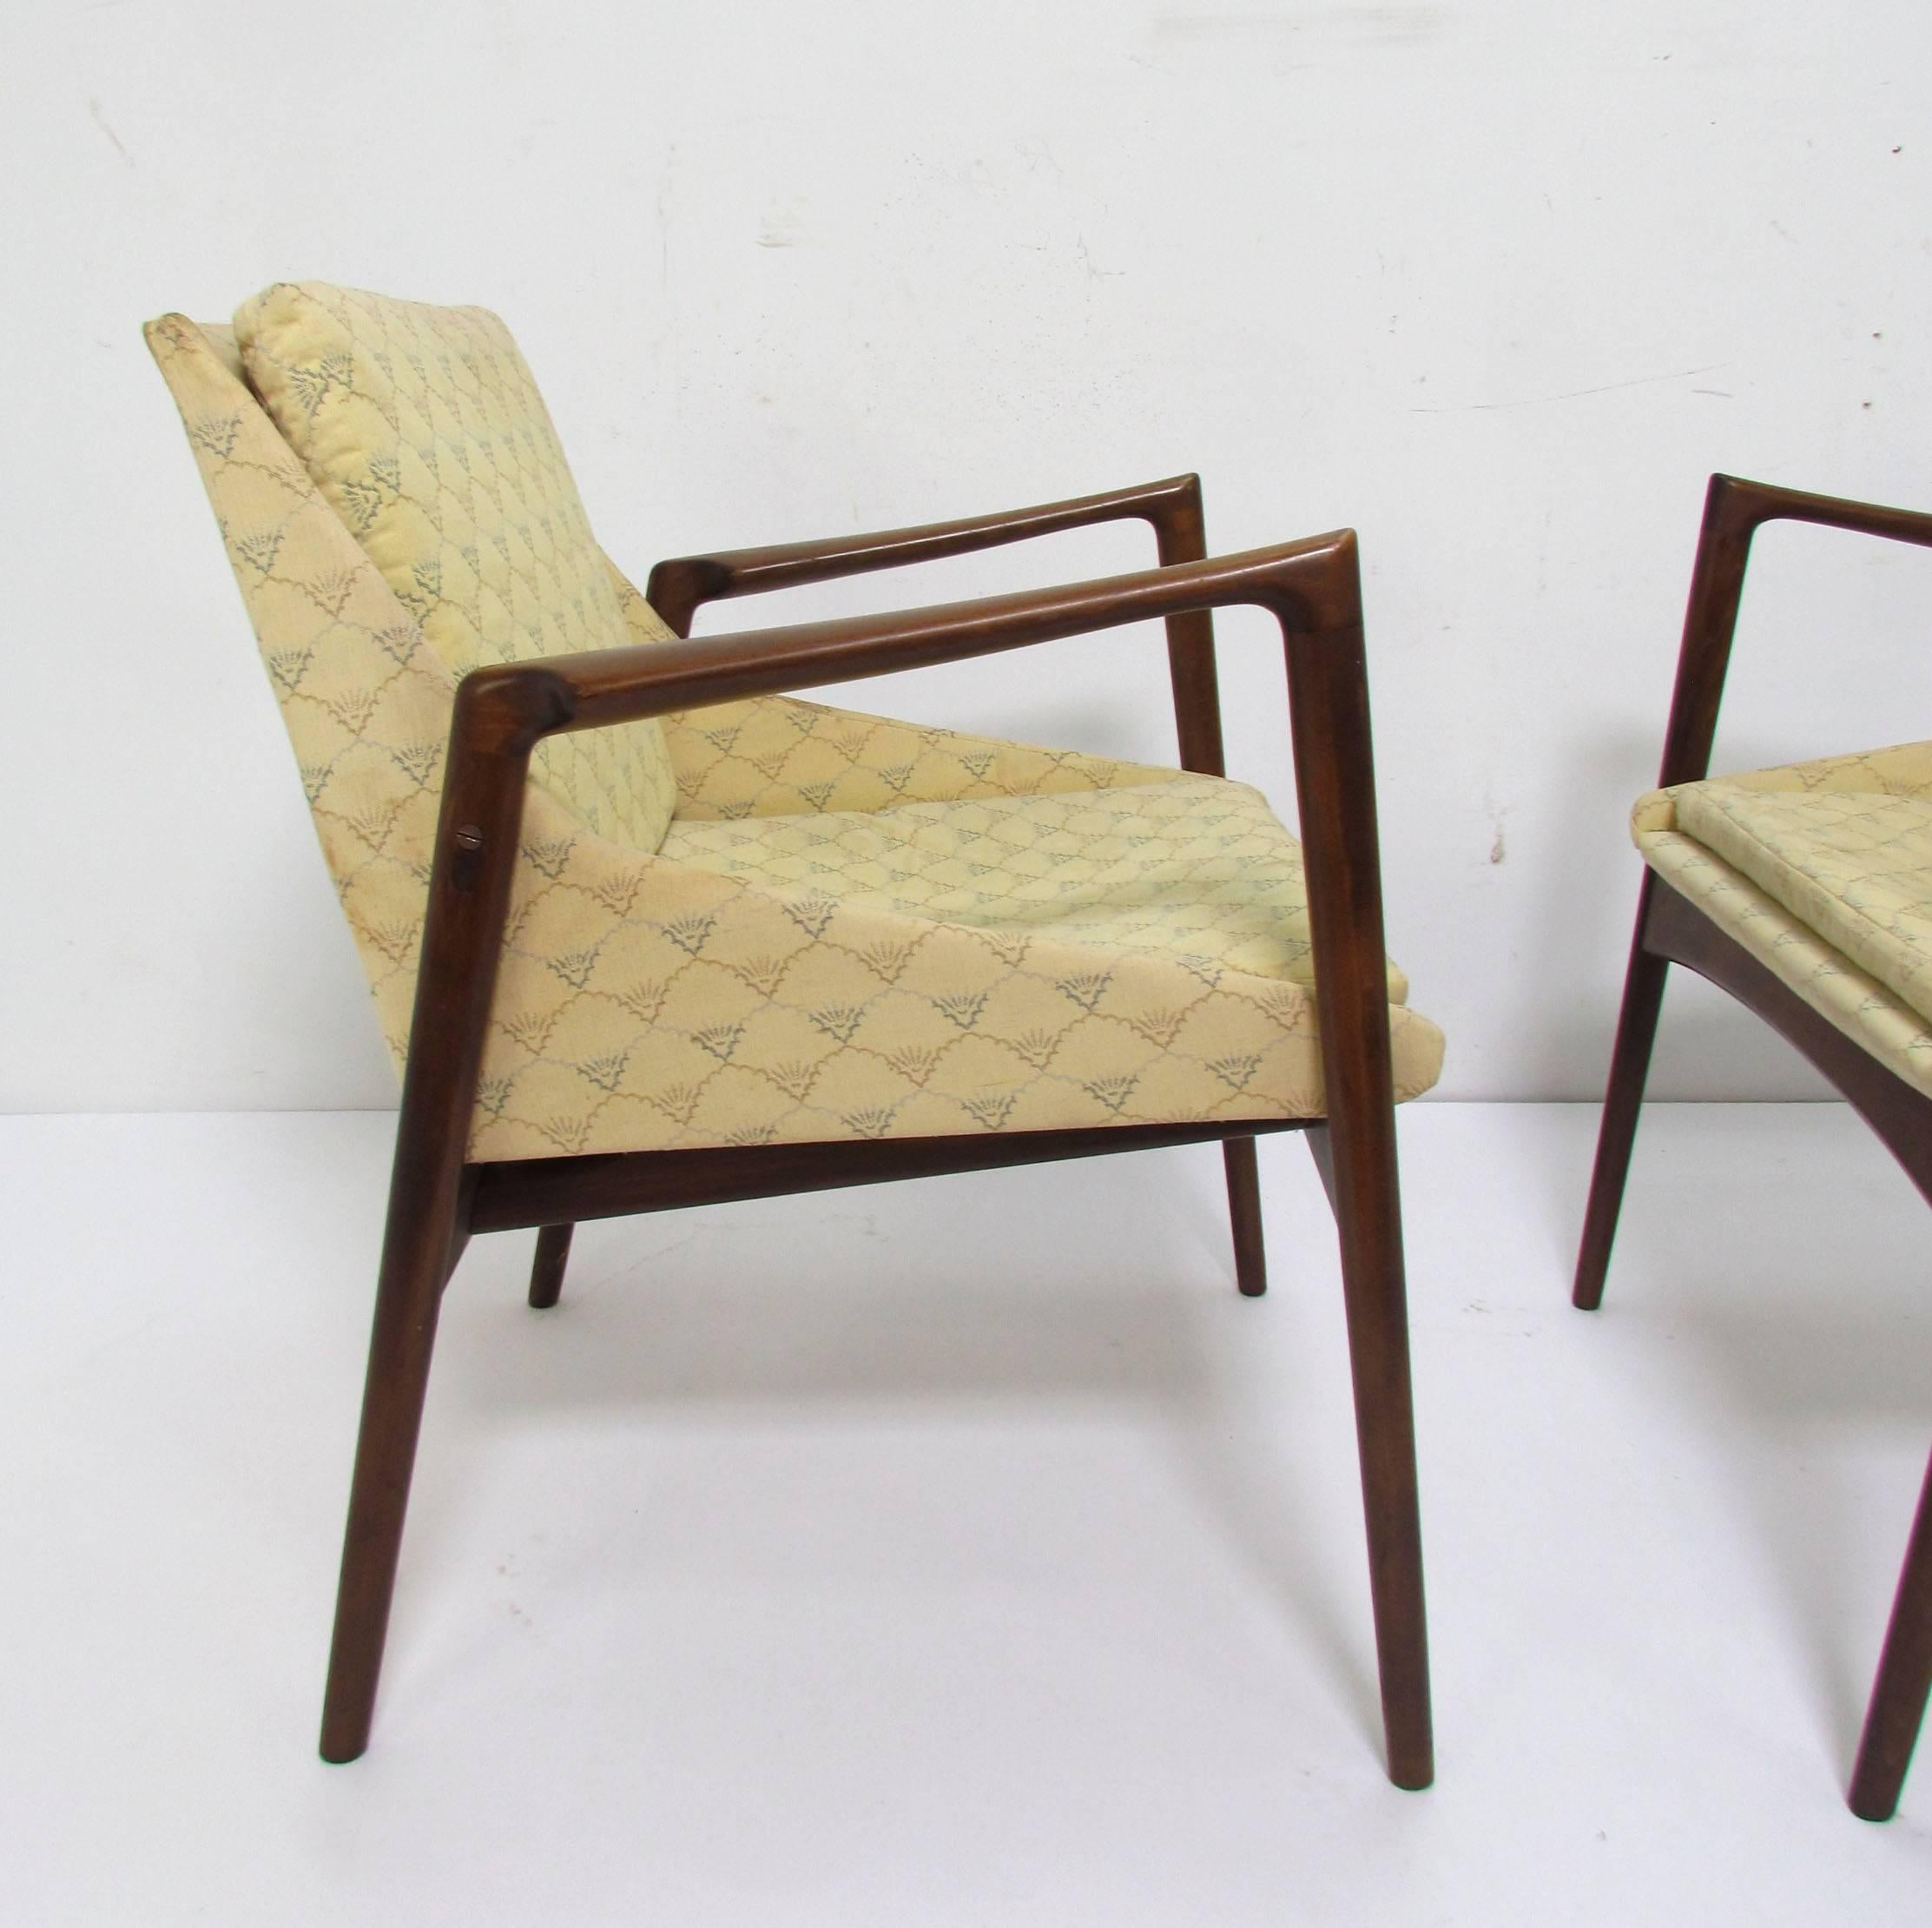 Pair of Danish lounge chairs with sculptural arms designed by Ib Kofod-Larsen for Selig, circa 1960s.